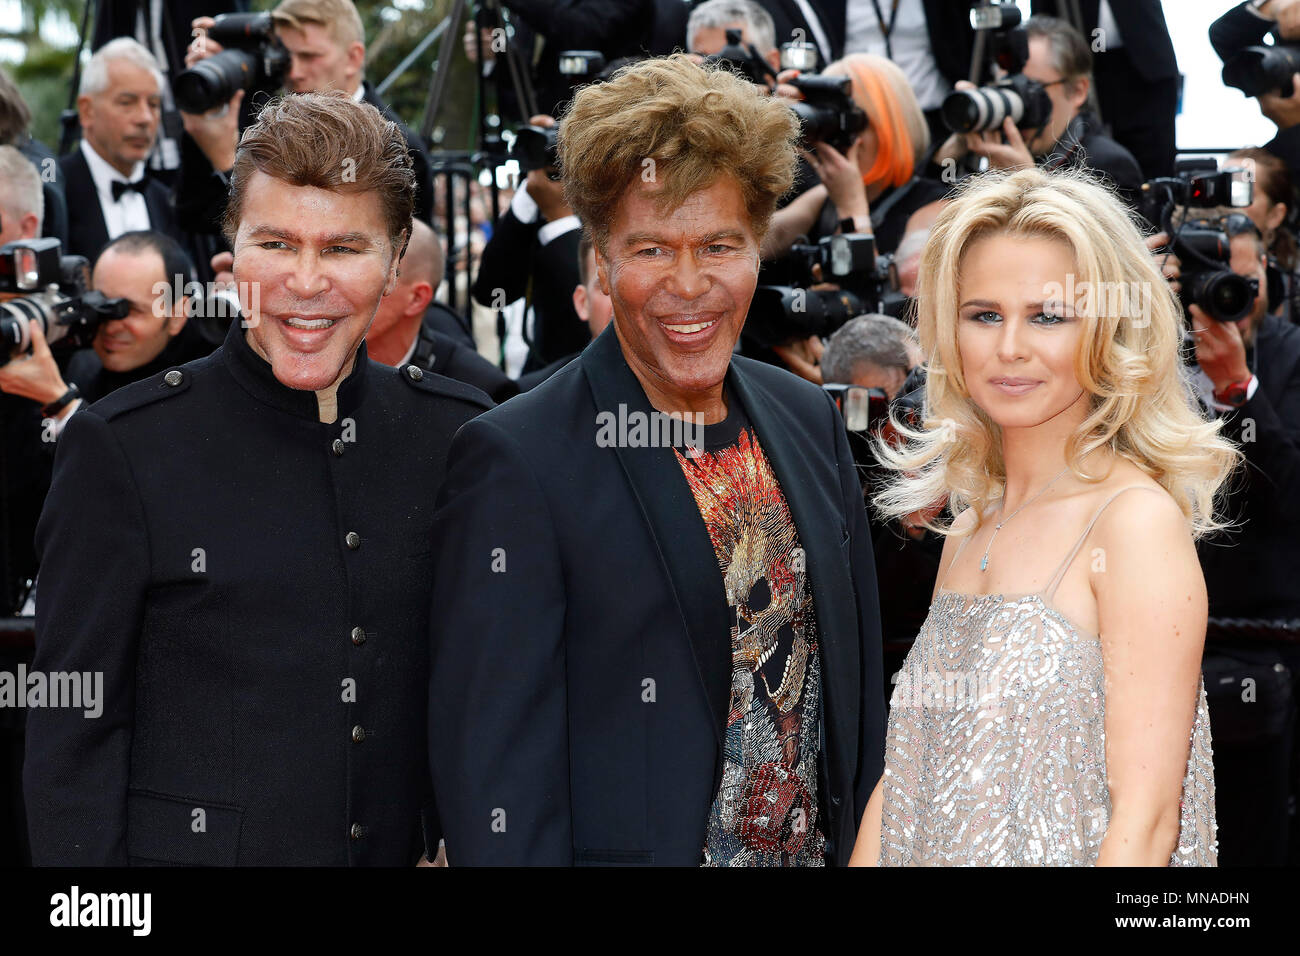 Cannes, France. 15th May 2018. Cannes, France. 15th May 2018. Grichka Bogdanoff, Igor Bogdanoff and Julie Jardon at work at the Solo: 'A Star Wars Story' premiere during the 71st Cannes Film Festival at the Palais des Festivals on May 15, 2018 in Cannes, France. Credit: John Rasimus/Media Punch ***FRANCE, SWEDEN, NORWAY, DENARK, FINLAND, USA, CZECH REPUBLIC, SOUTH AMERICA ONLY*** Credit: MediaPunch Inc/Alamy Live News Stock Photo